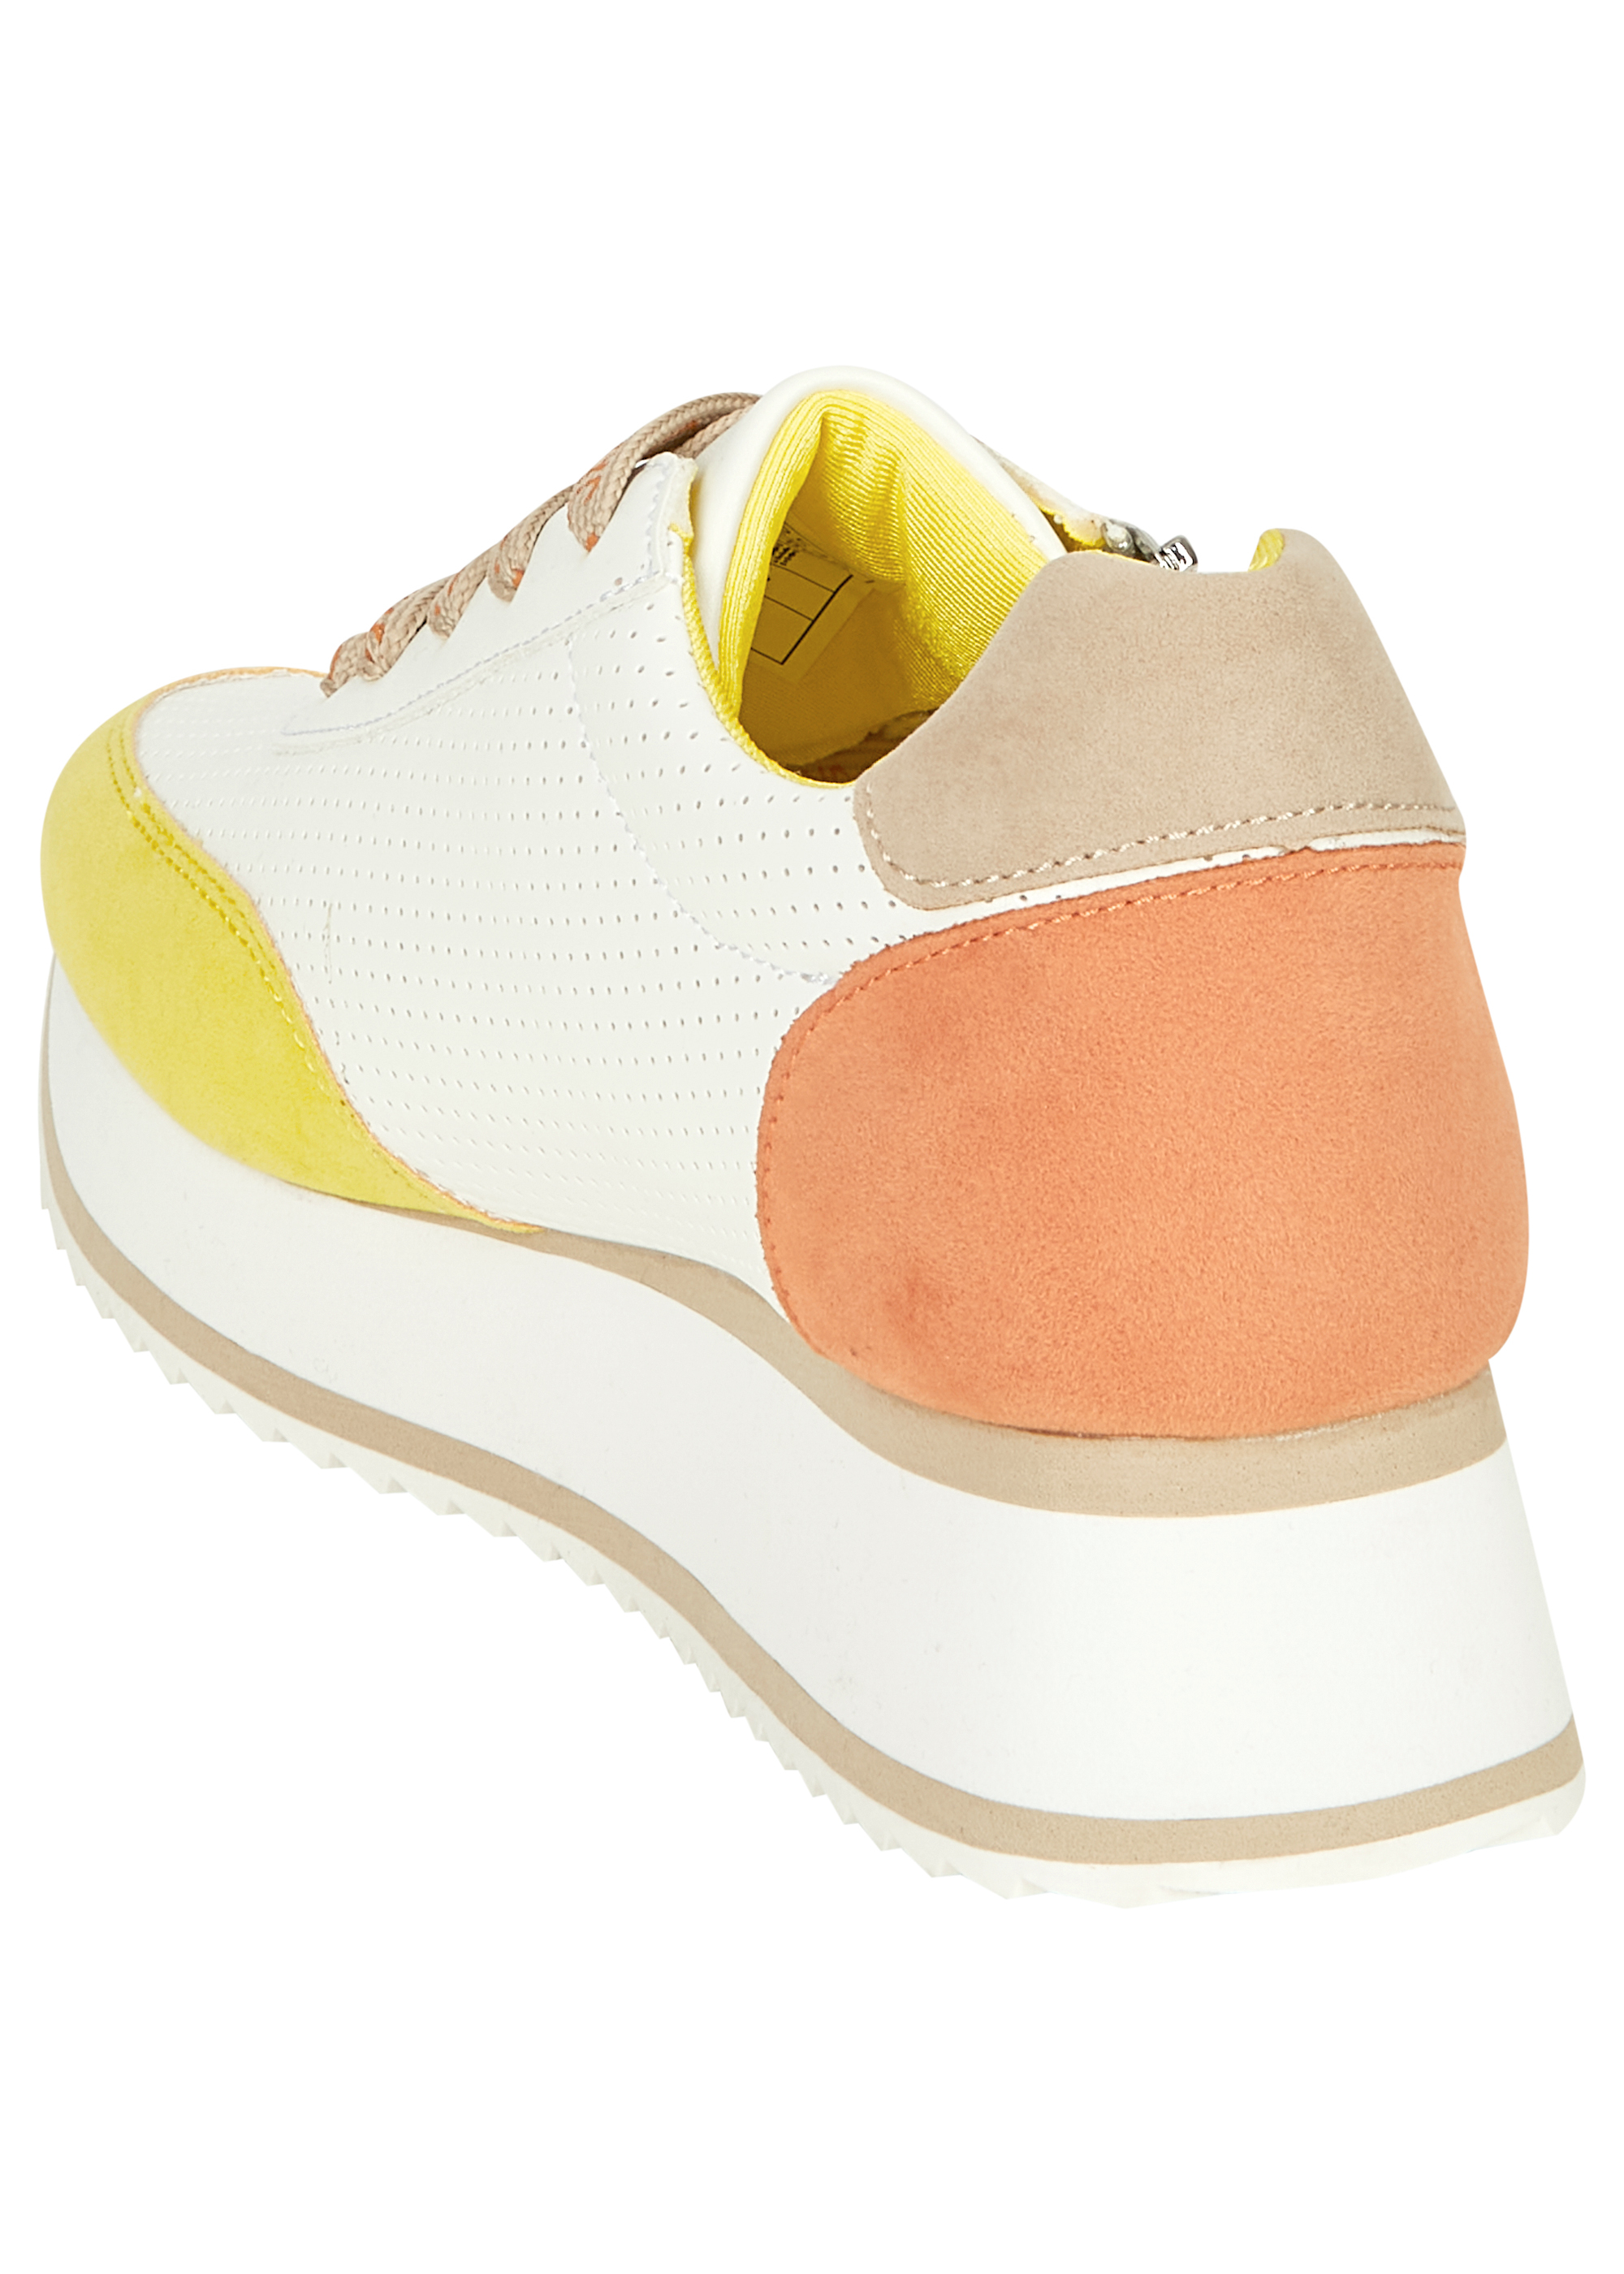 Rock Your Curves by Angelina K. Sneaker in Limone 